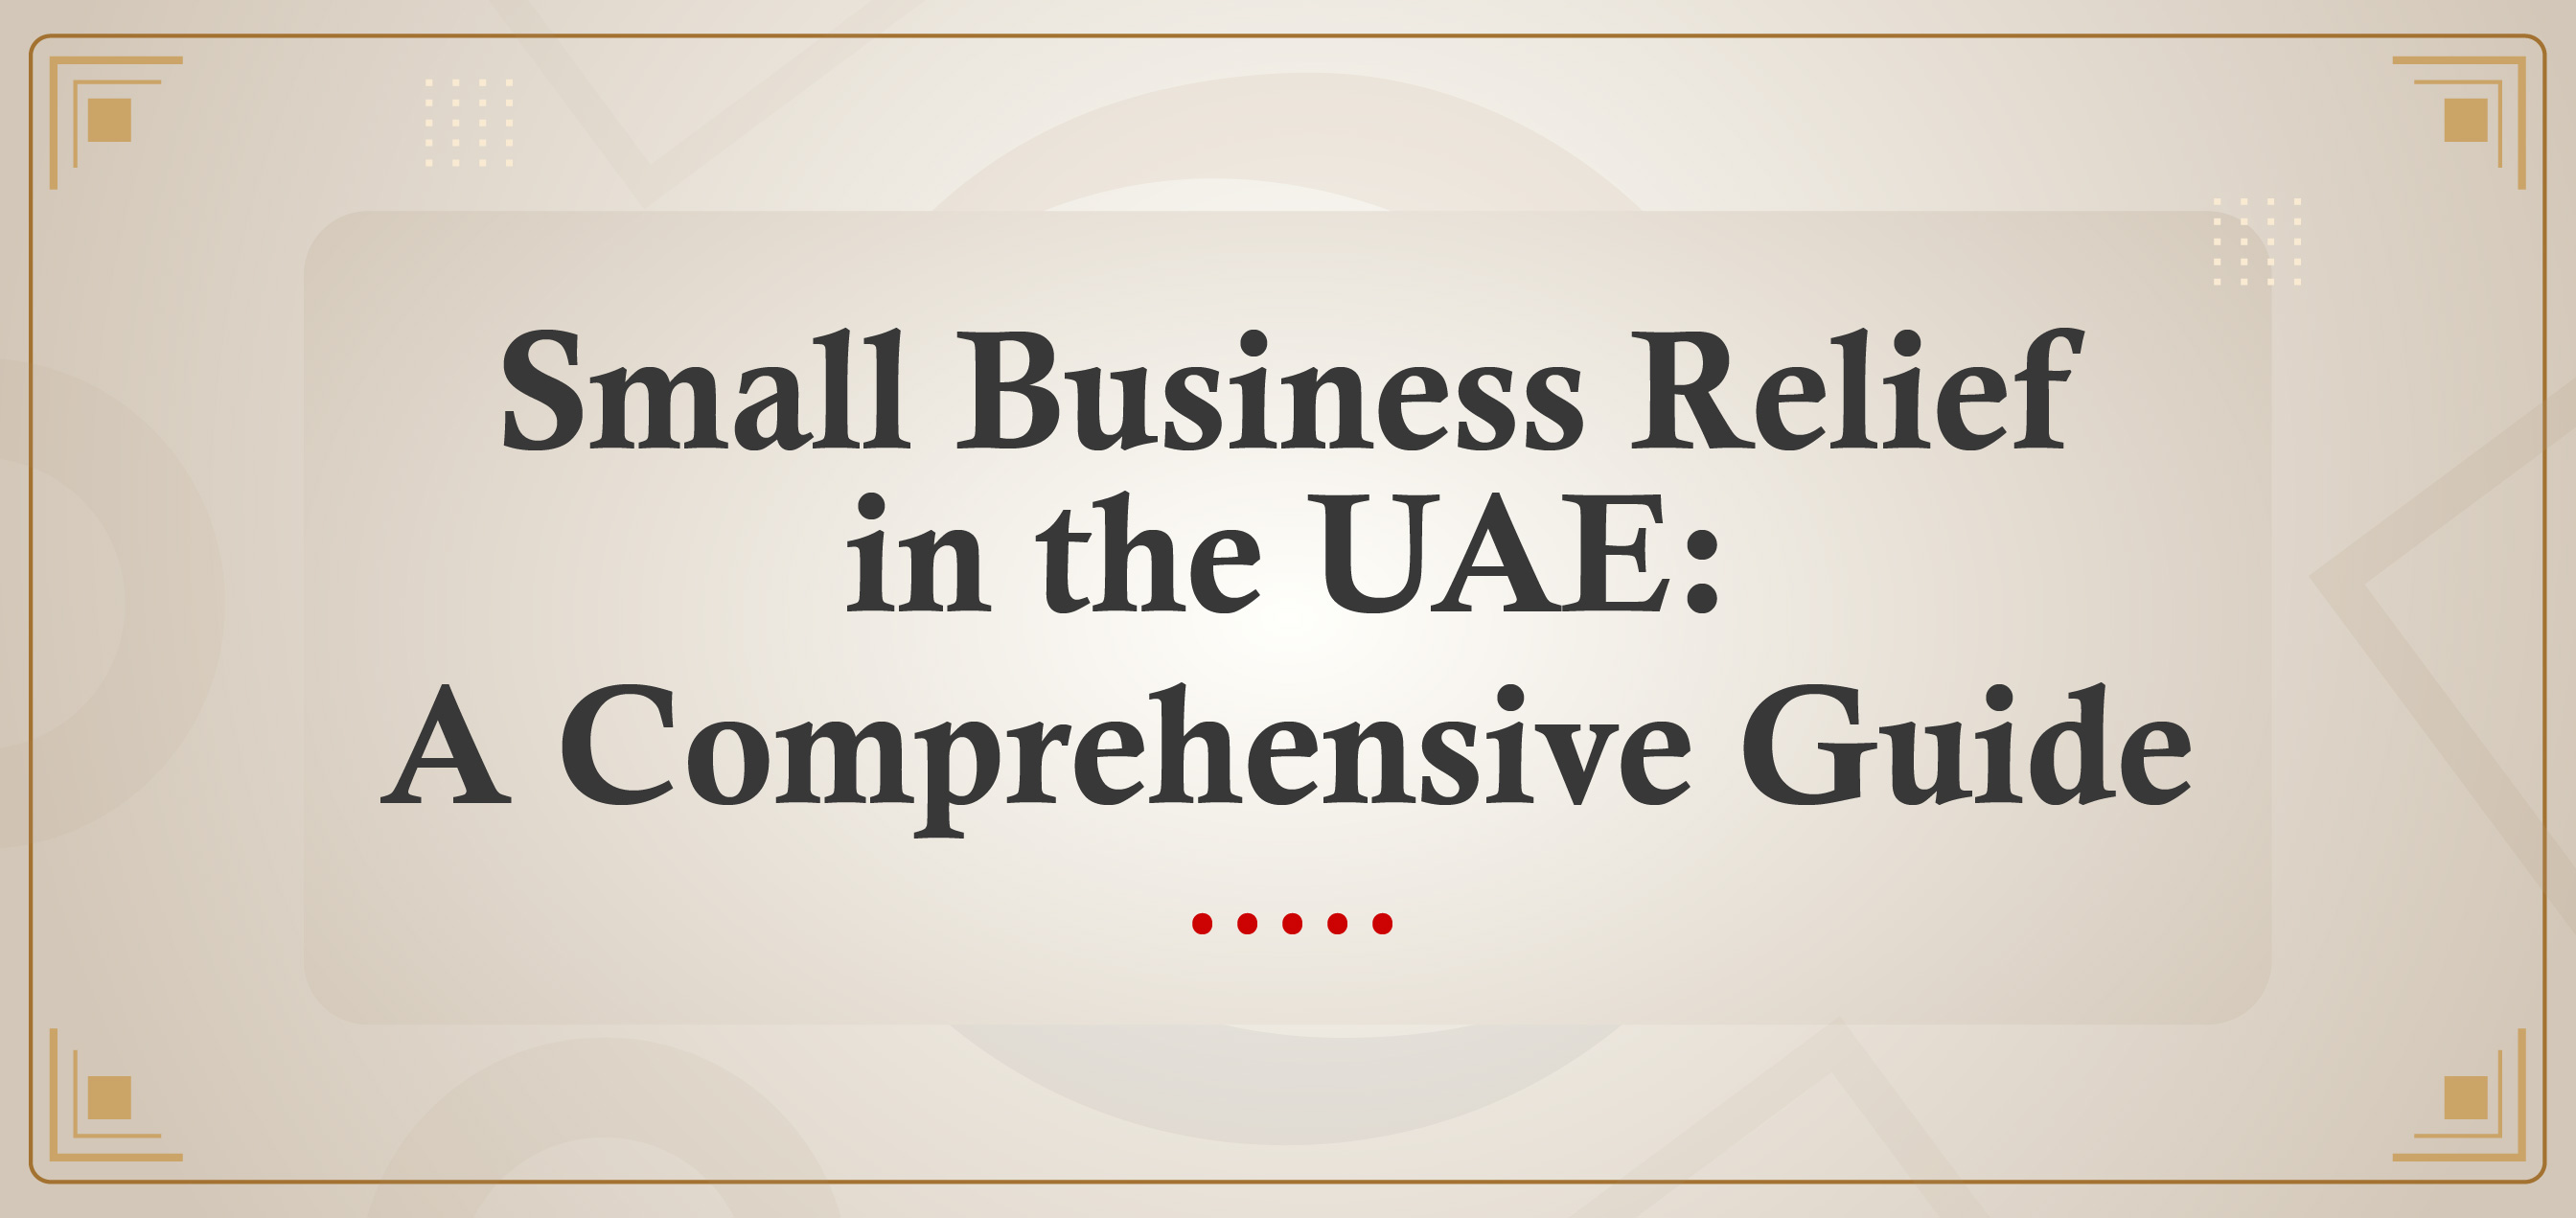 Small Business Relief in the UAE: A Comprehensive Guide